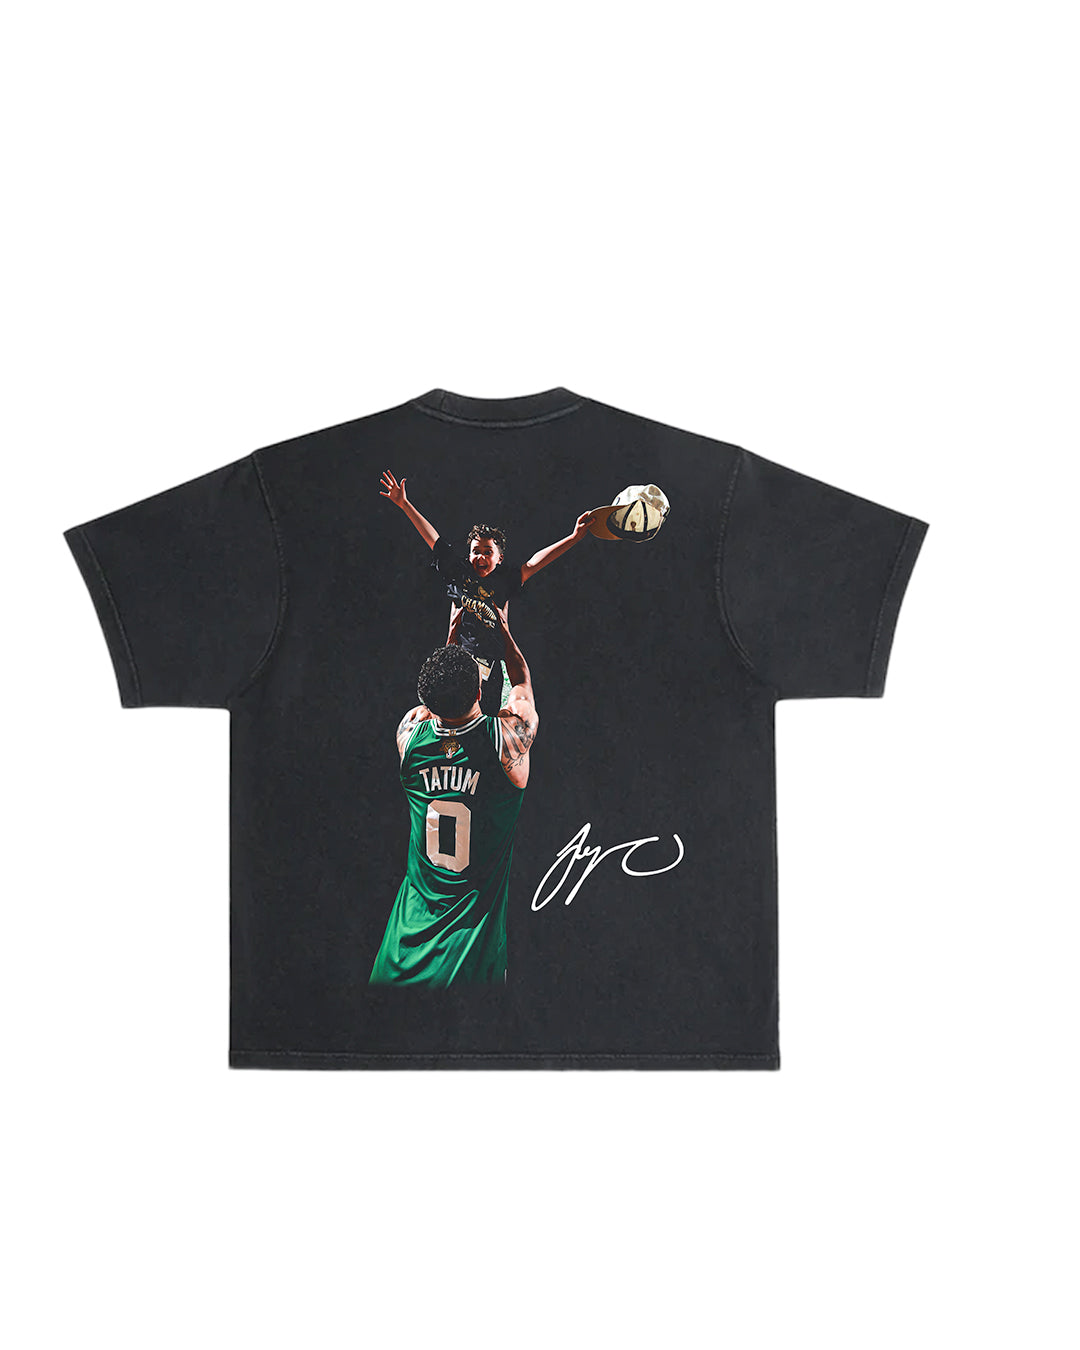 JT Defining moments Tee